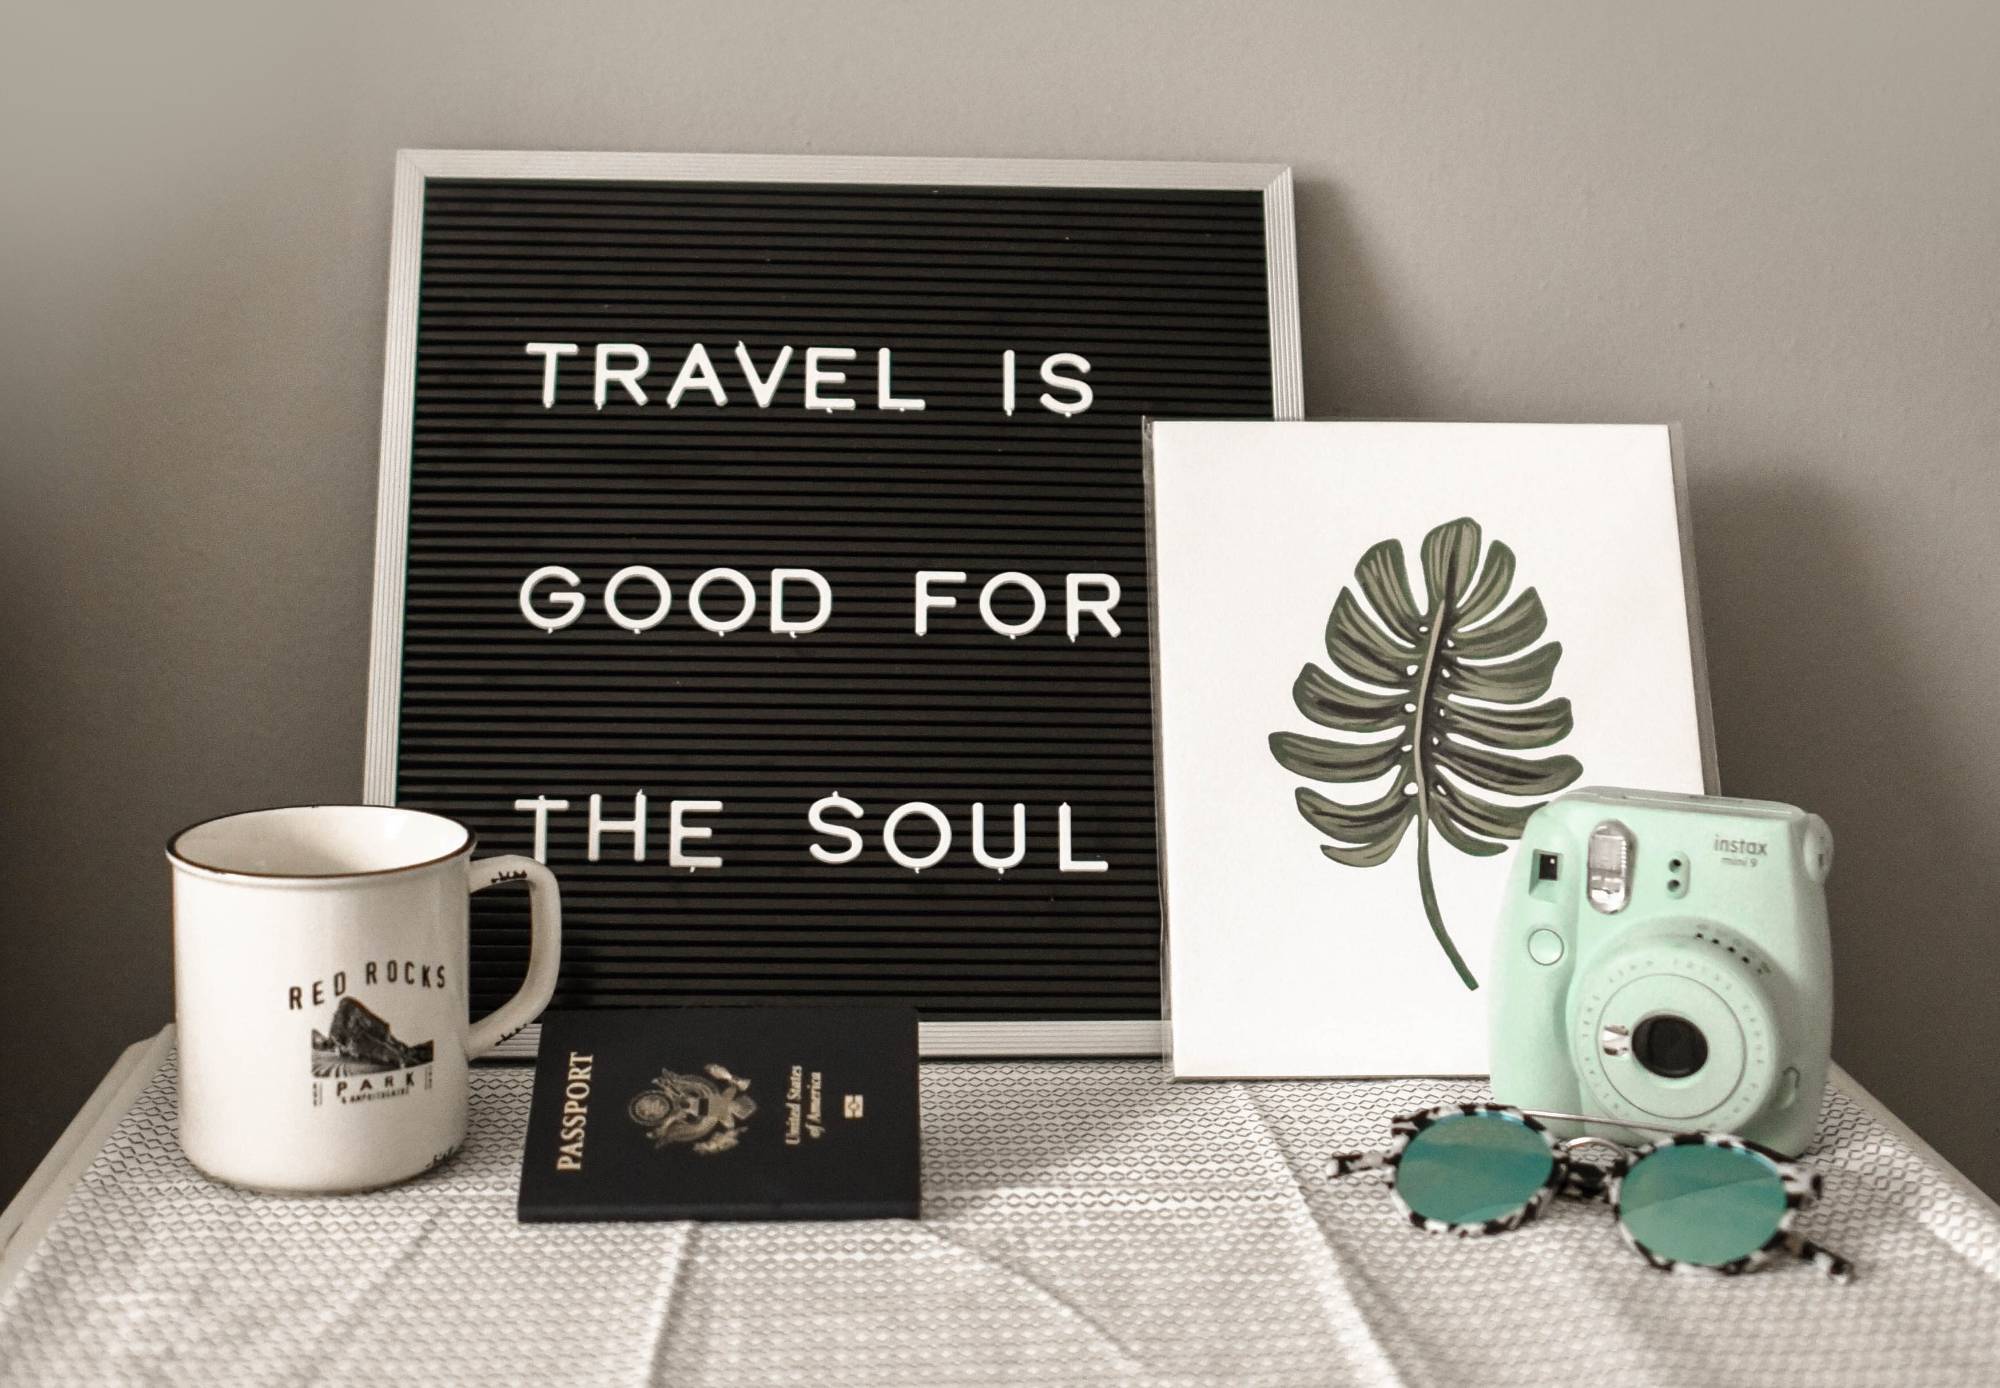 Sign stating Travel is good for the Soul along with a mug, passport, leaf print, camera, and sunglasses